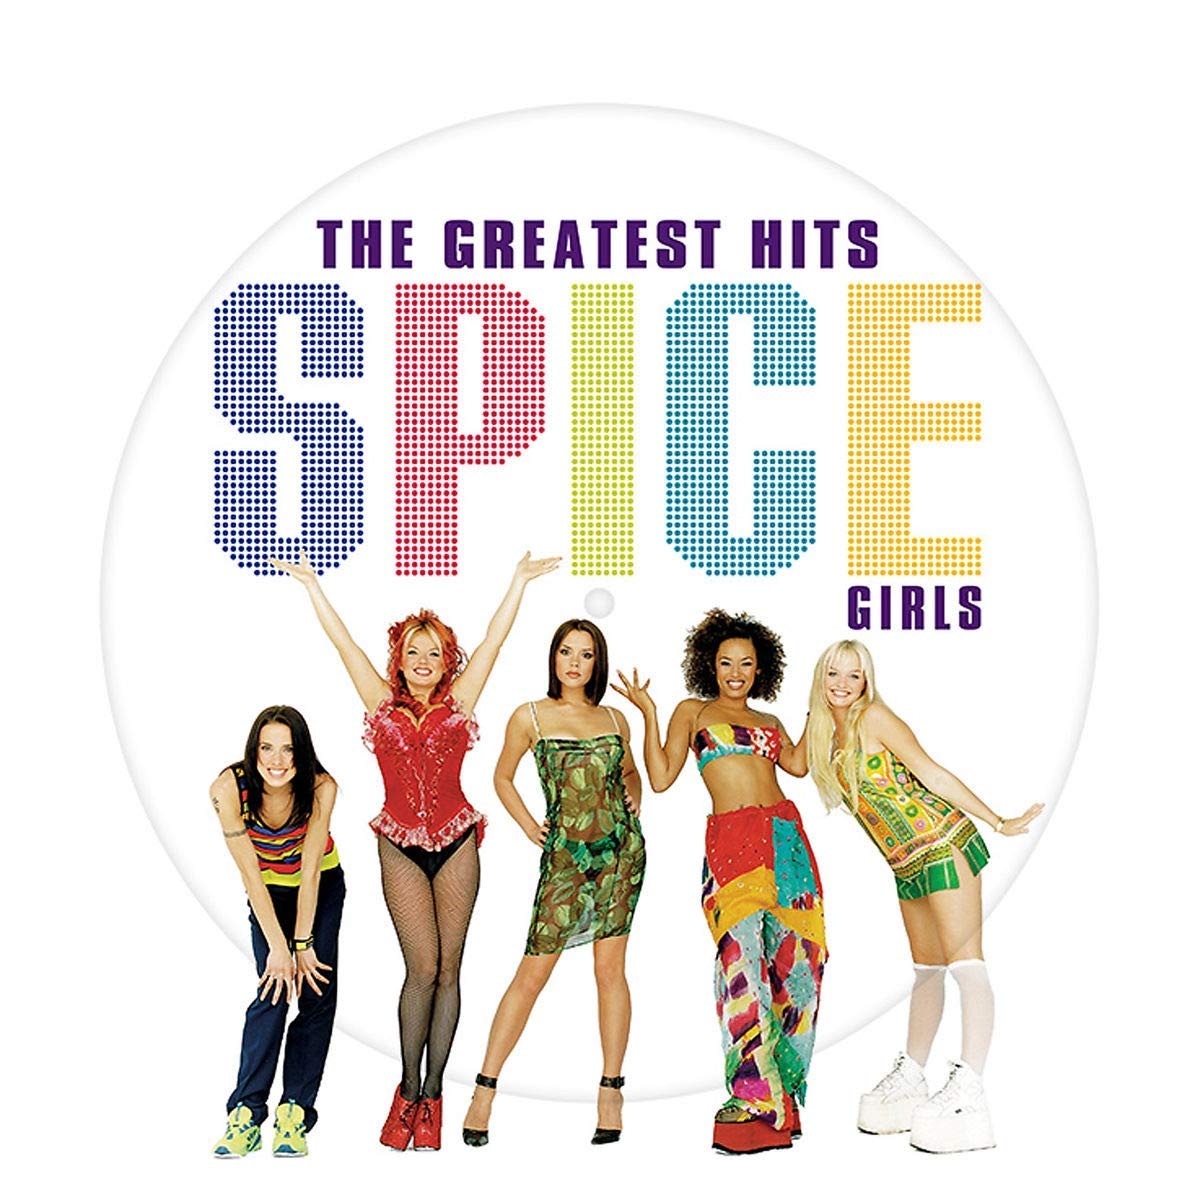 Spice Girls - The Greatest Hits (LP)